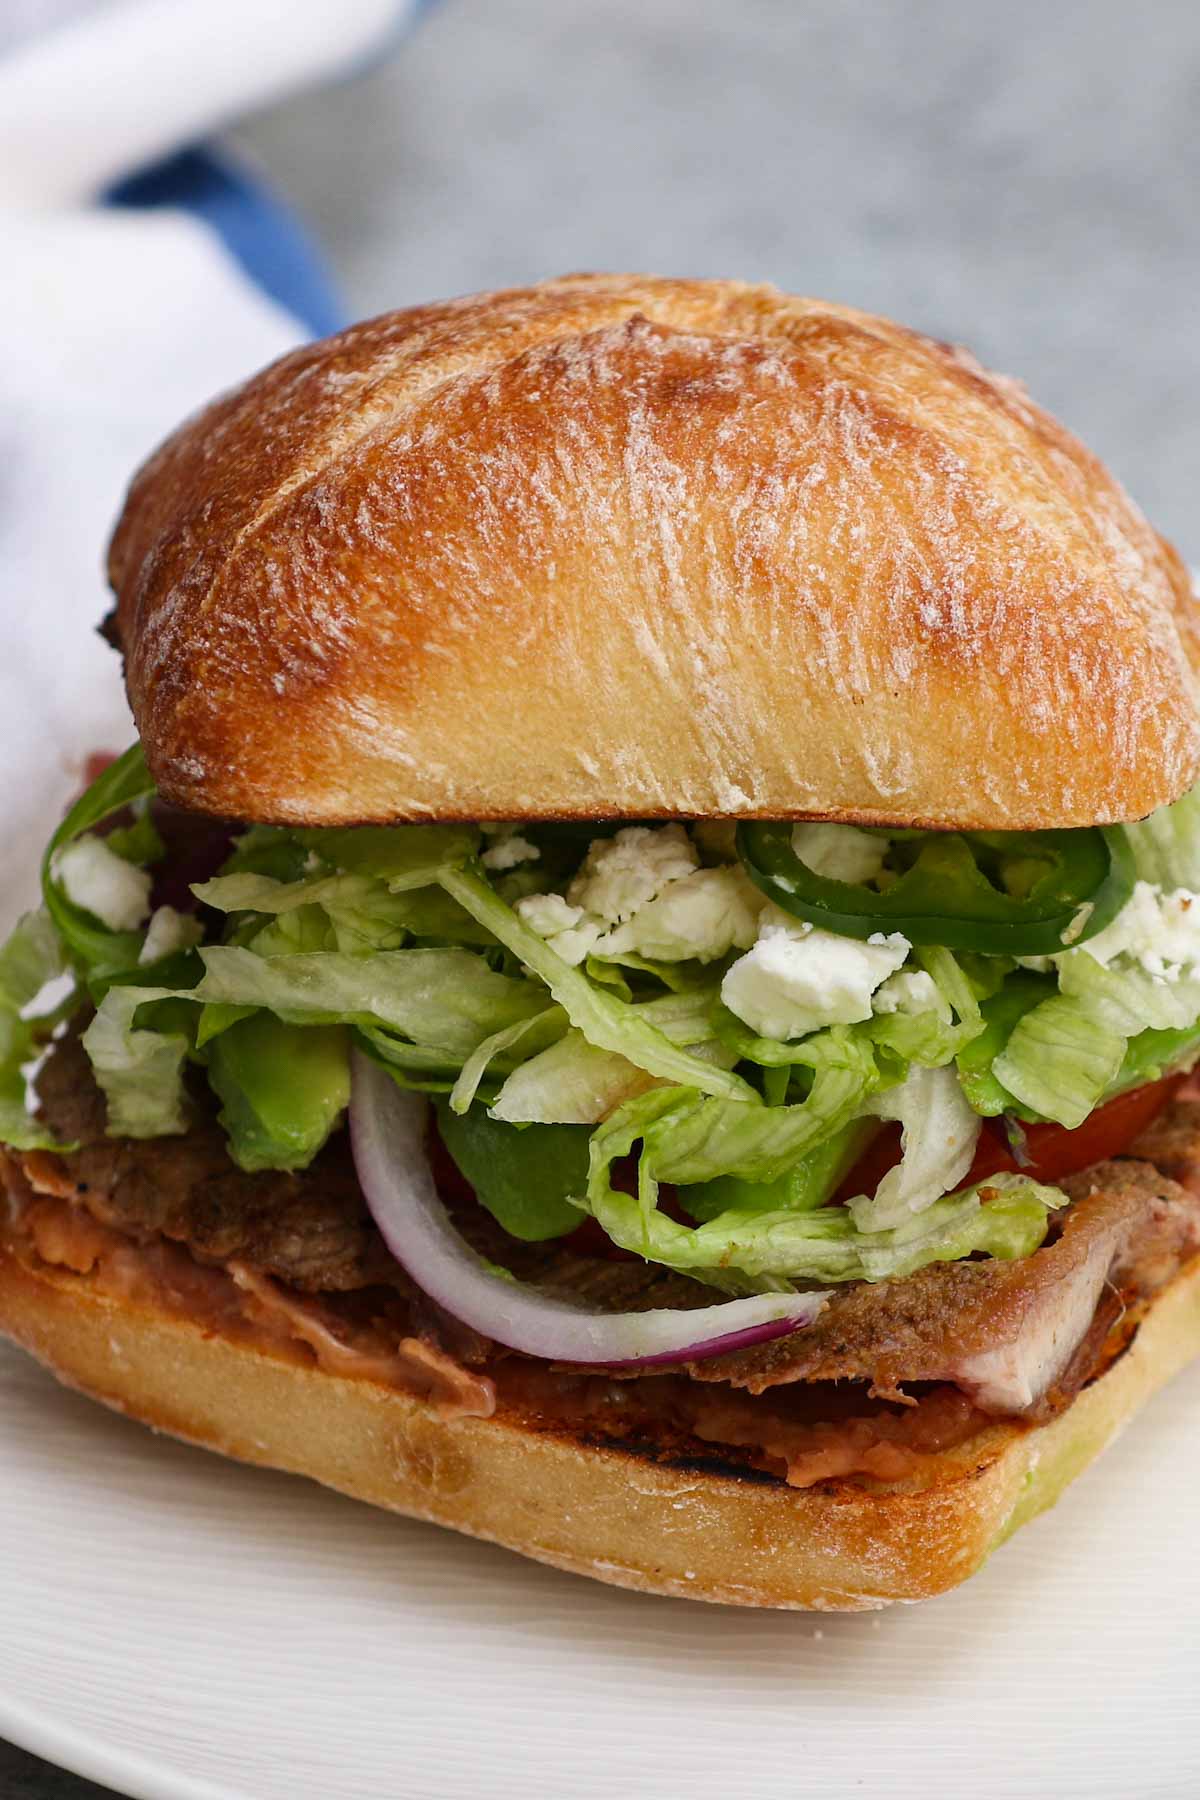 If you’re looking to enjoy iconic sandwiches from all over the world, the Mexican Torta has to be on your list! This Torta Mexicana recipe combines a juicy, well-seasoned sirloin steak with your favorite Mexican ingredients like refried beans and cojita cheese. Make it spicy with sriracha and jalapeños! 